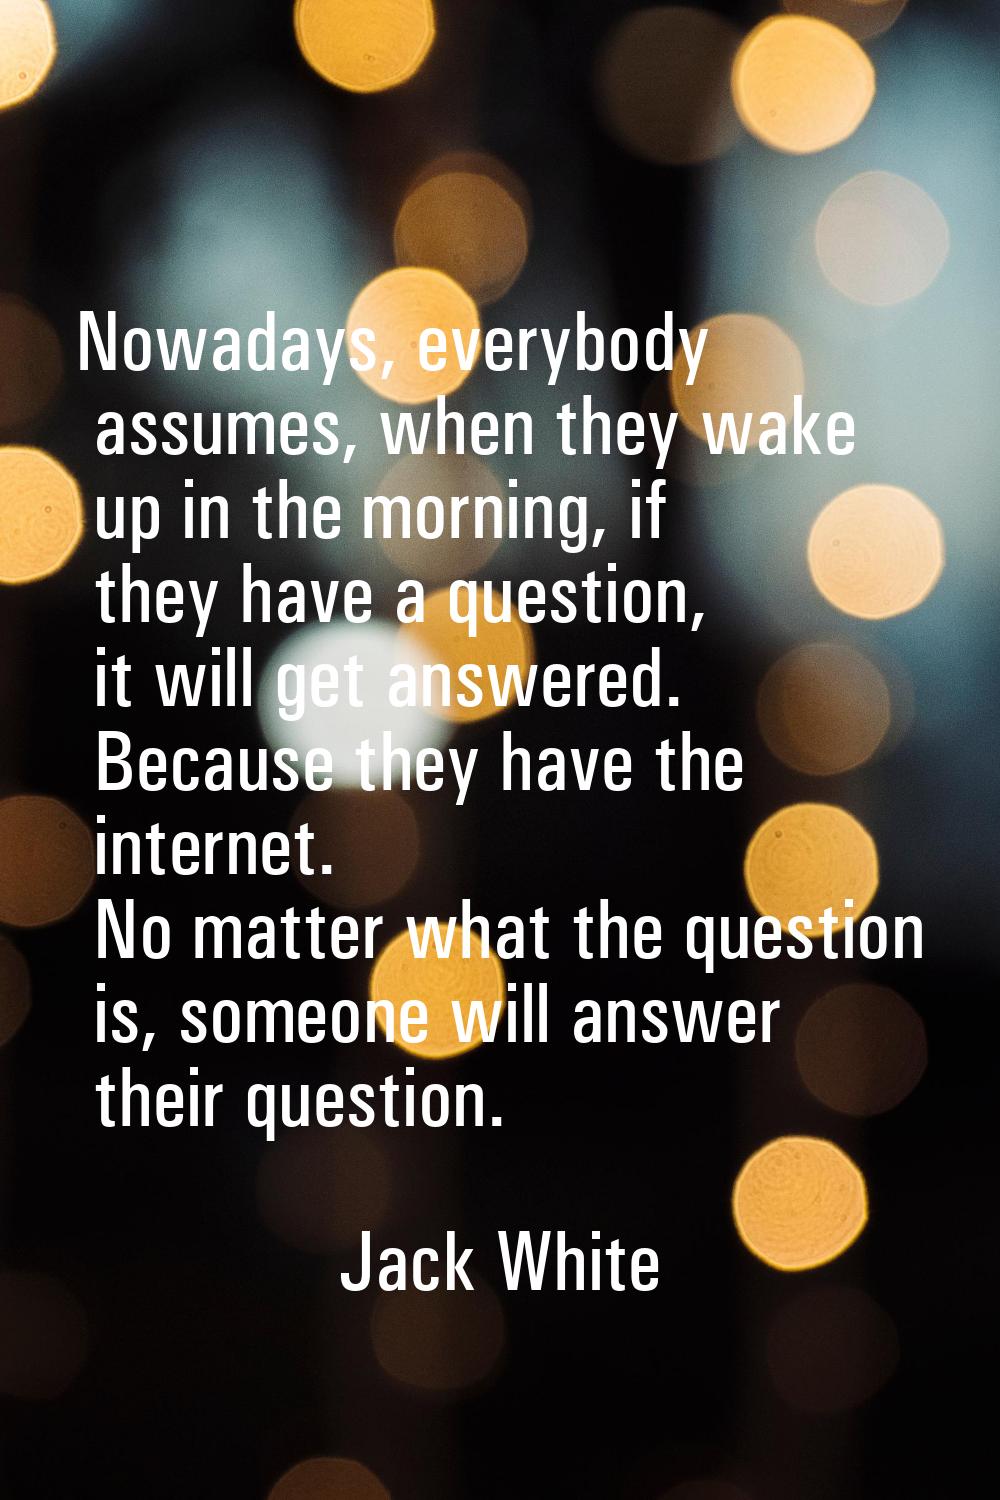 Nowadays, everybody assumes, when they wake up in the morning, if they have a question, it will get